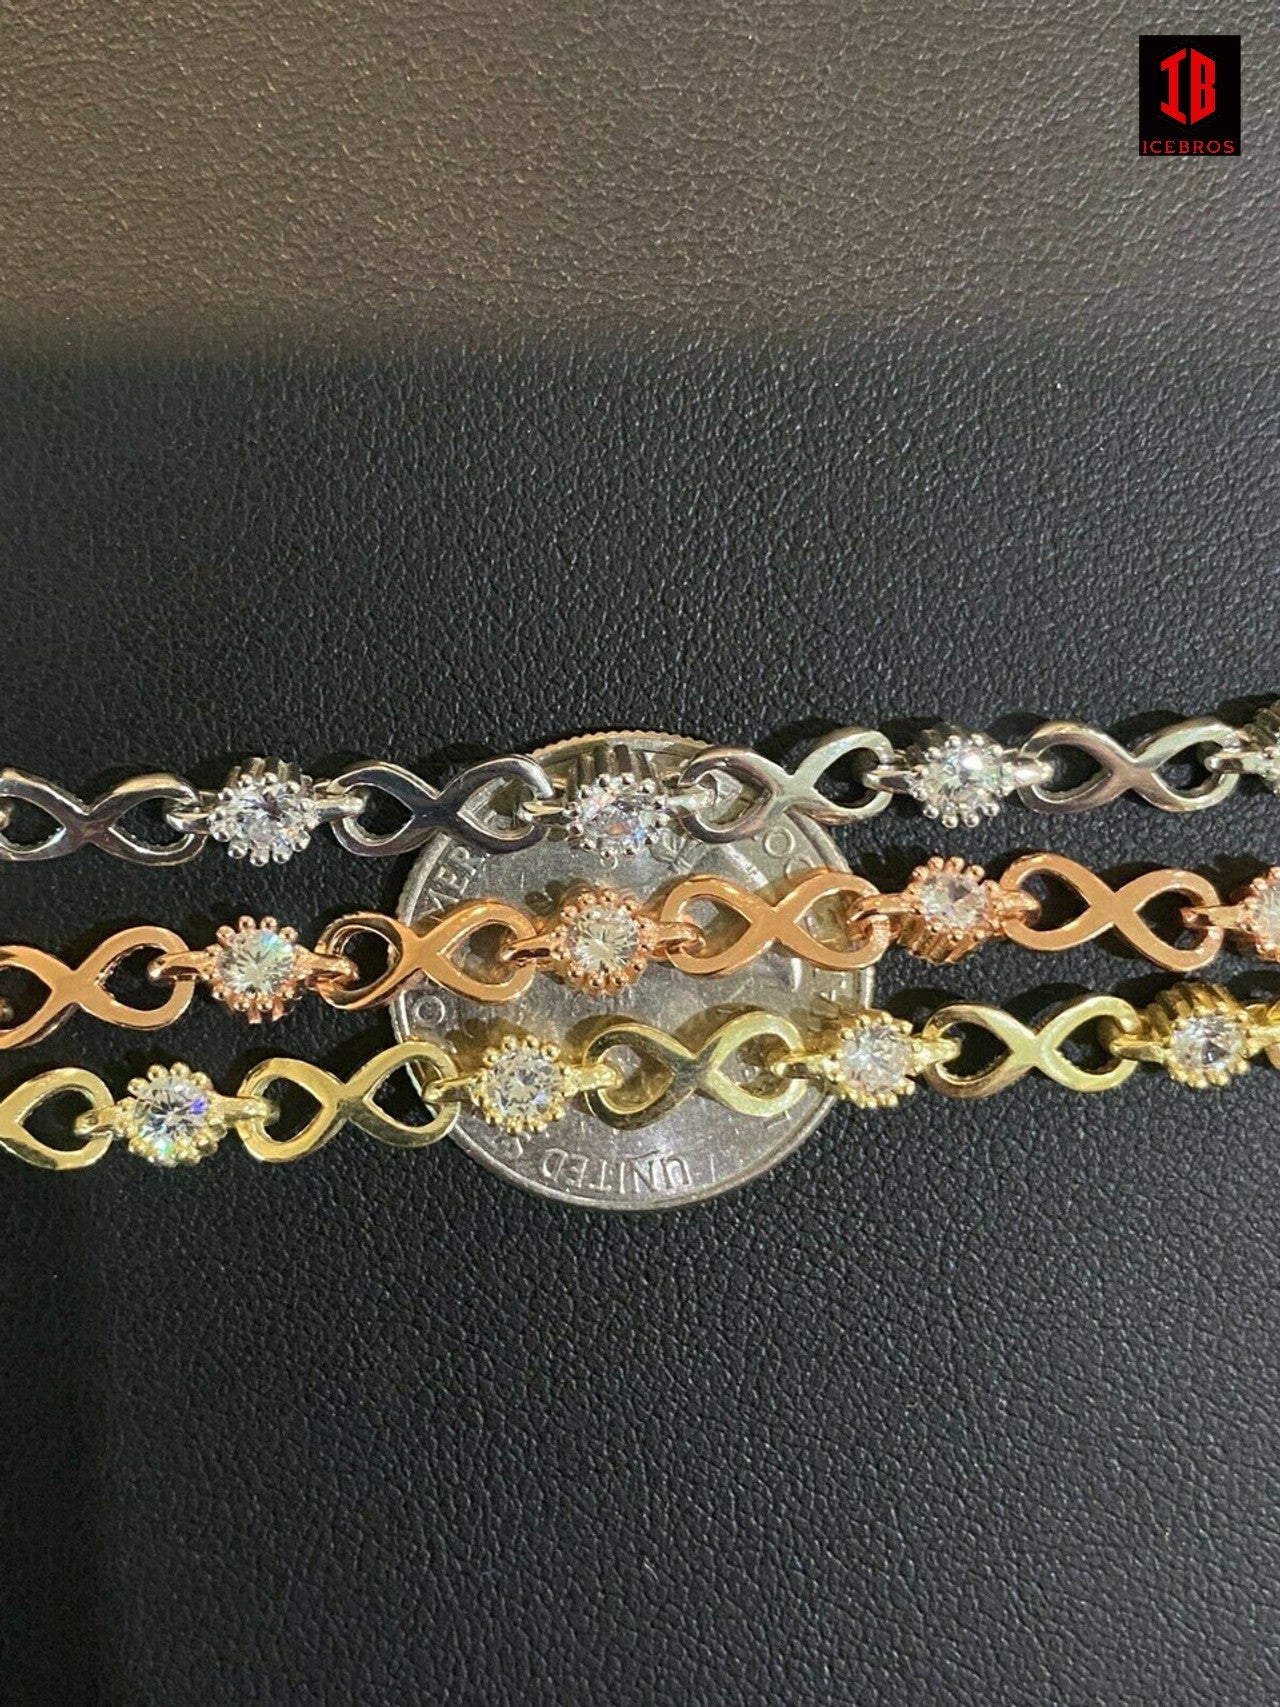 Real 925 Sterling Silver / Yellow Rose Gold Infinity Tennis CZ Ladies Bracelet